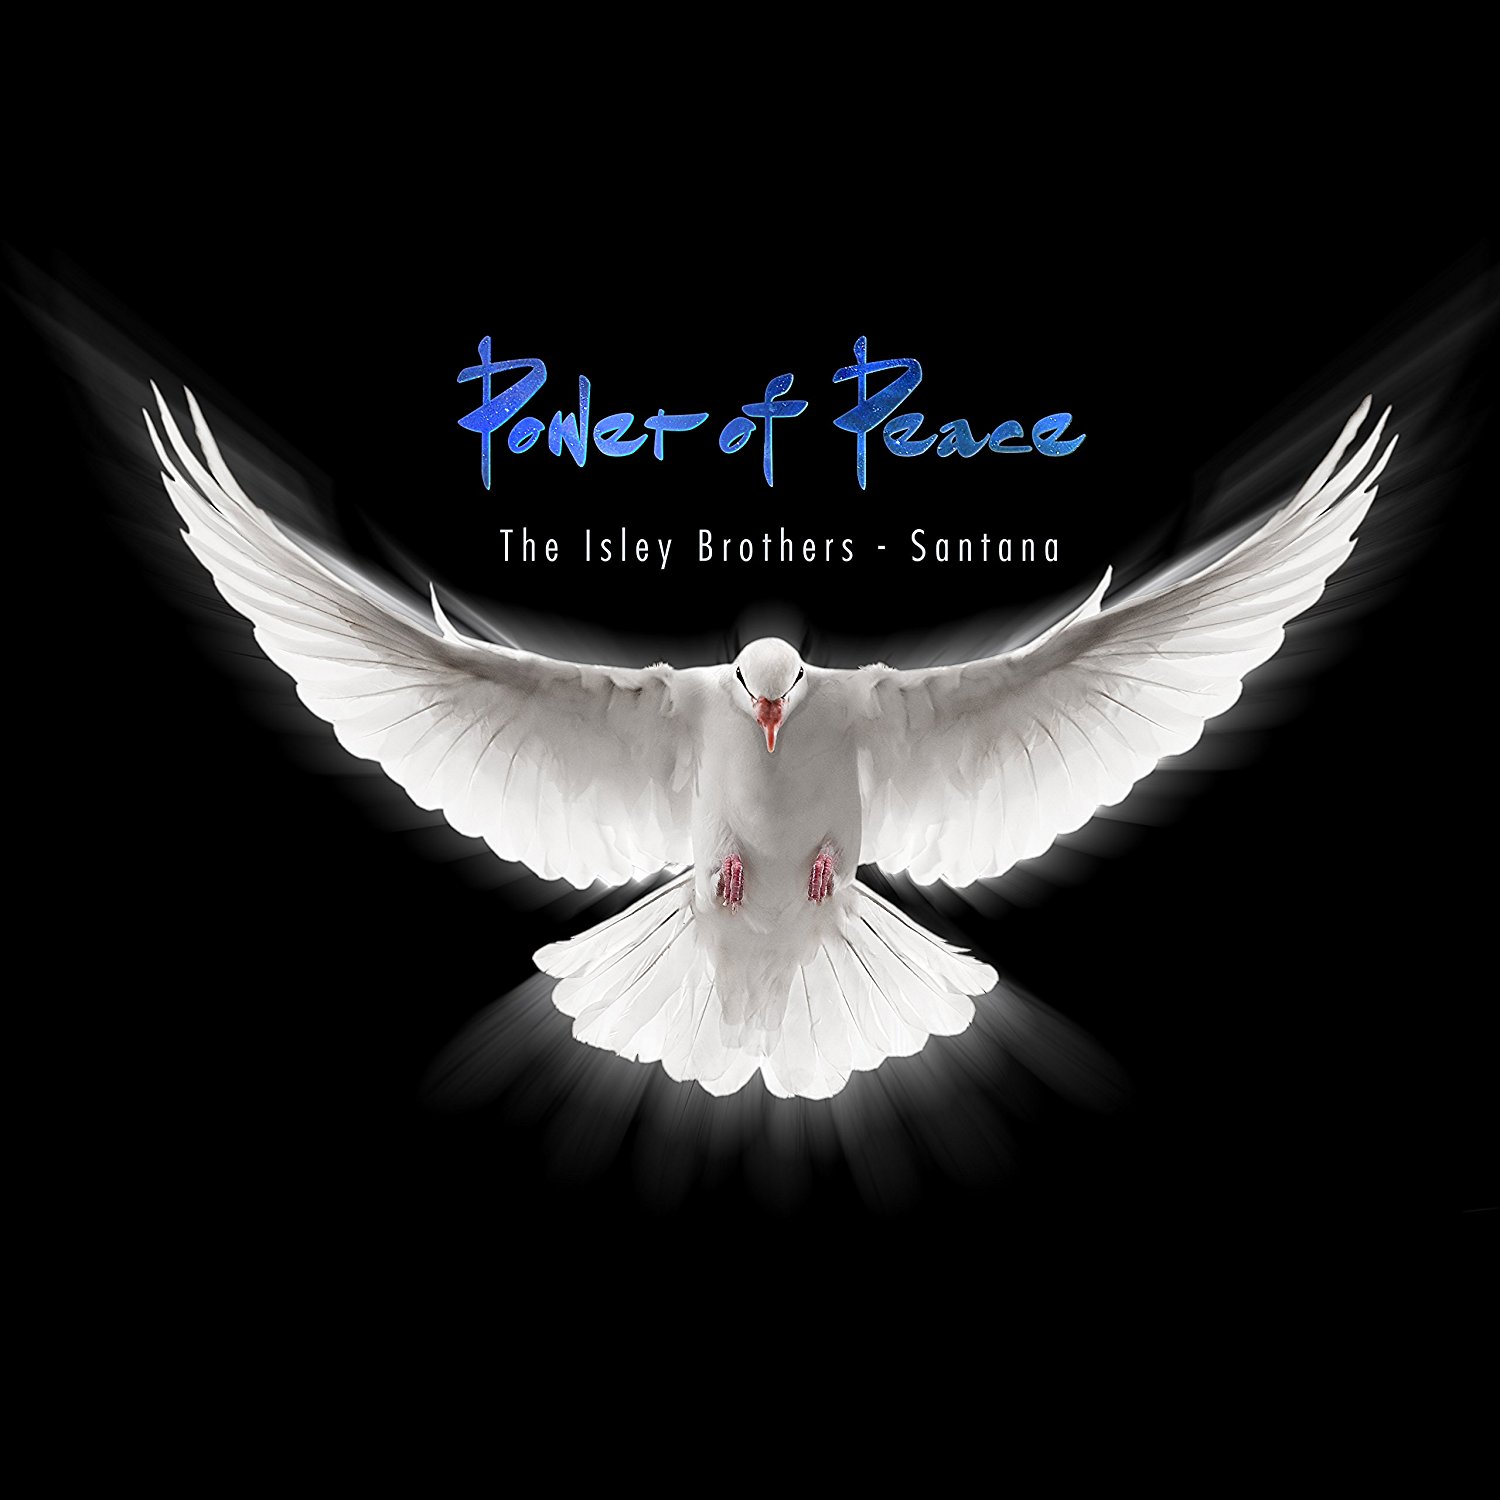 2017 – Power Of Peace (with The Isley Brothers)